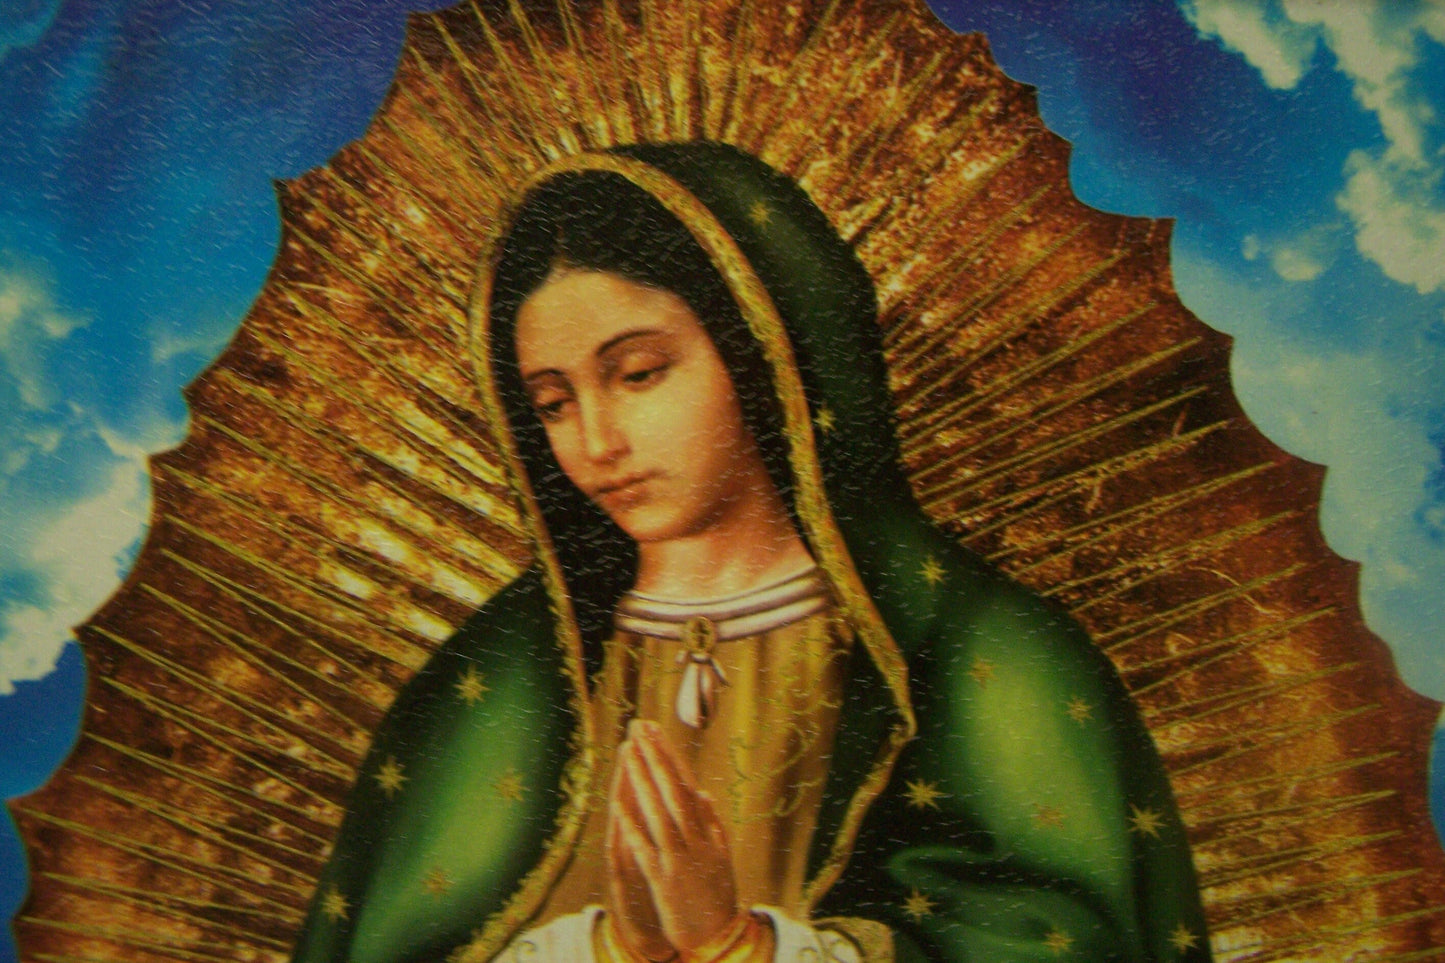 Framed Giclee Print - Virgin of Guadalupe in Blue Sky with Cherubs - Mexico